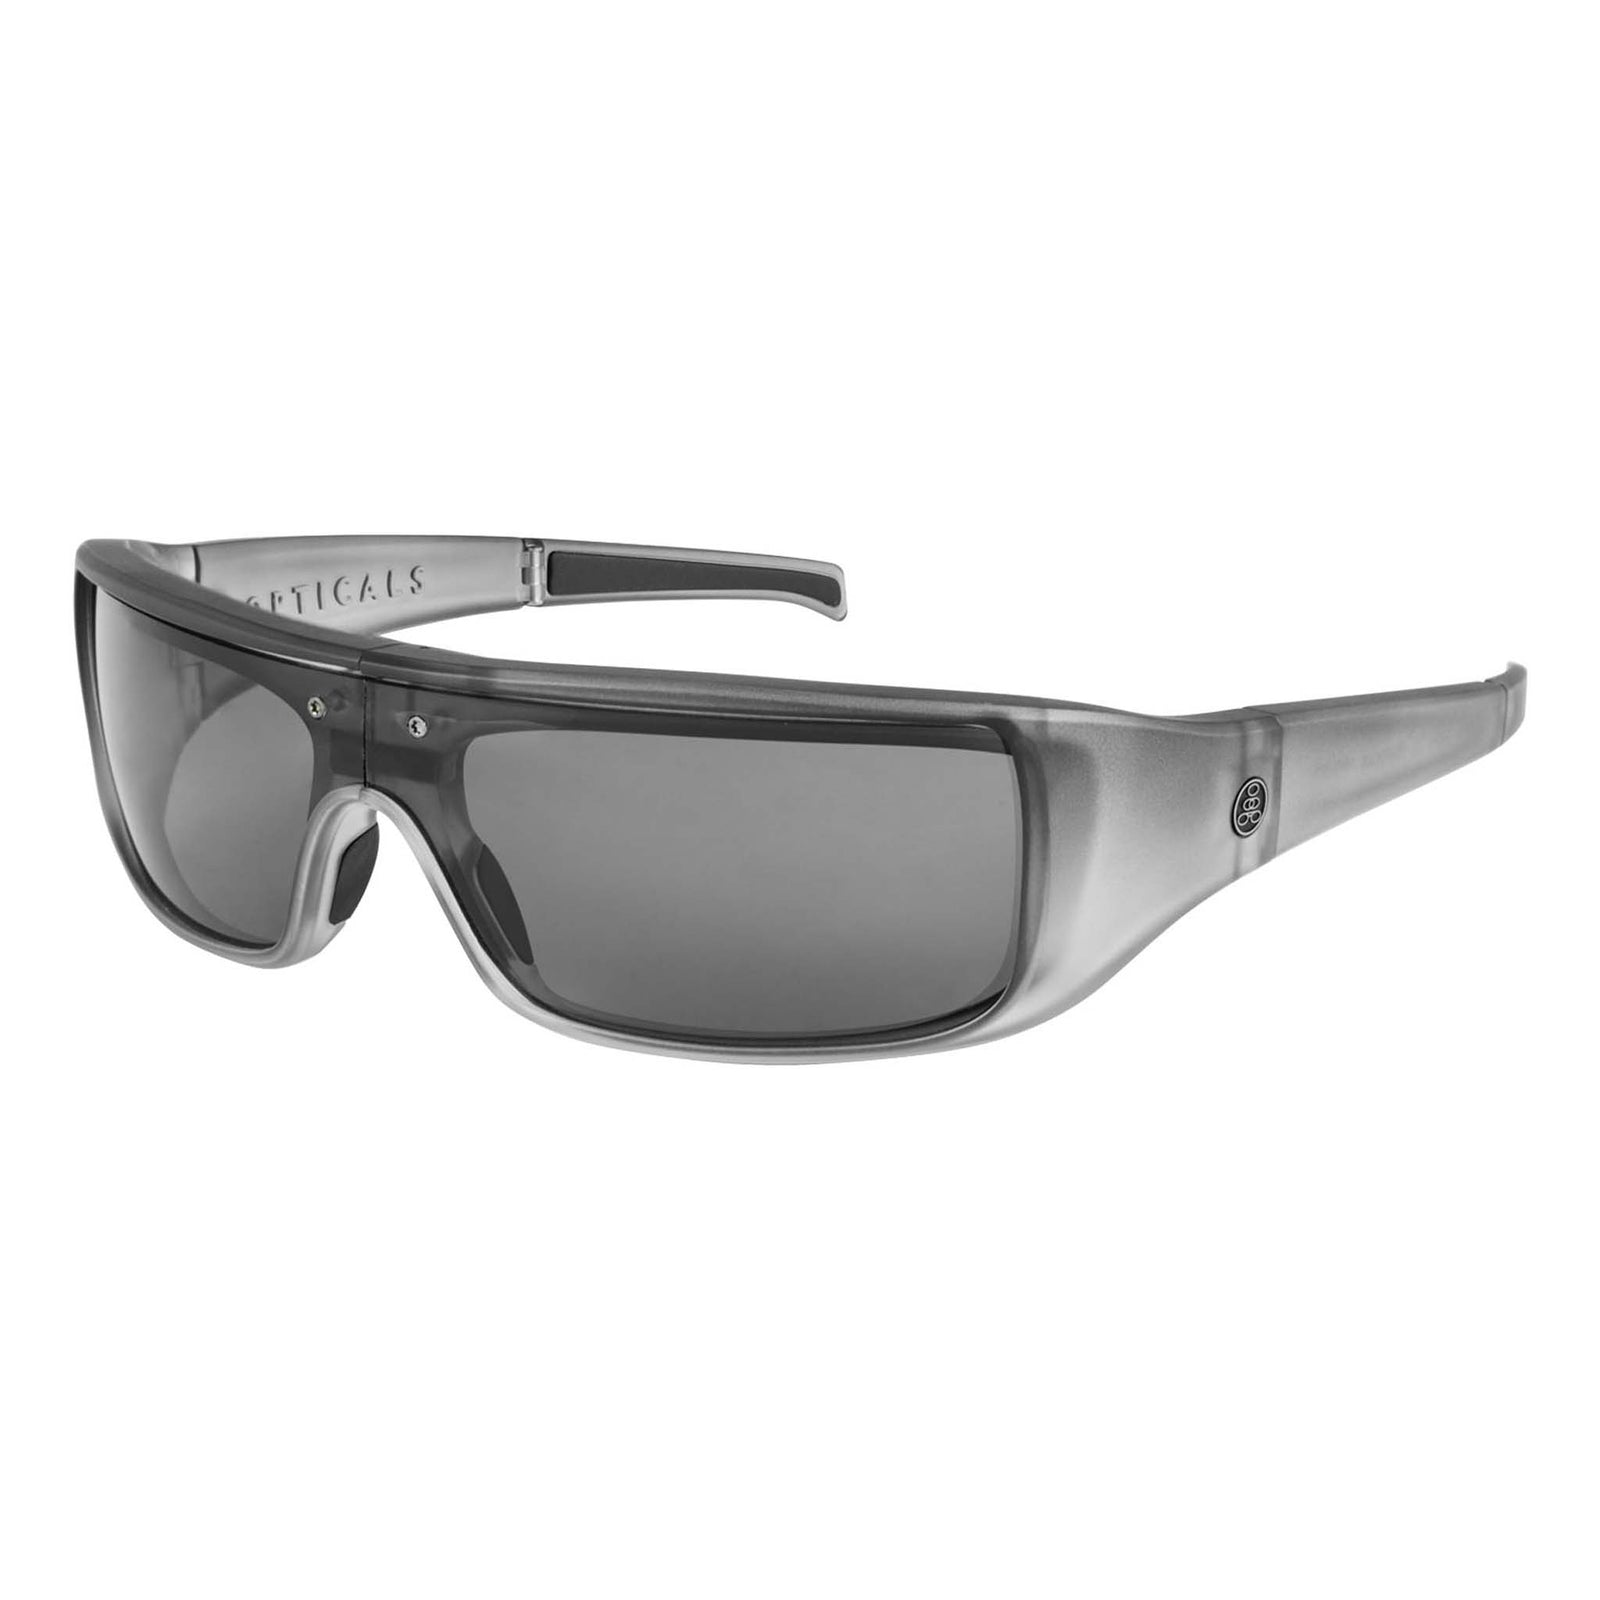 Close-up of matte smoke sunglasses with polarized gray lenses